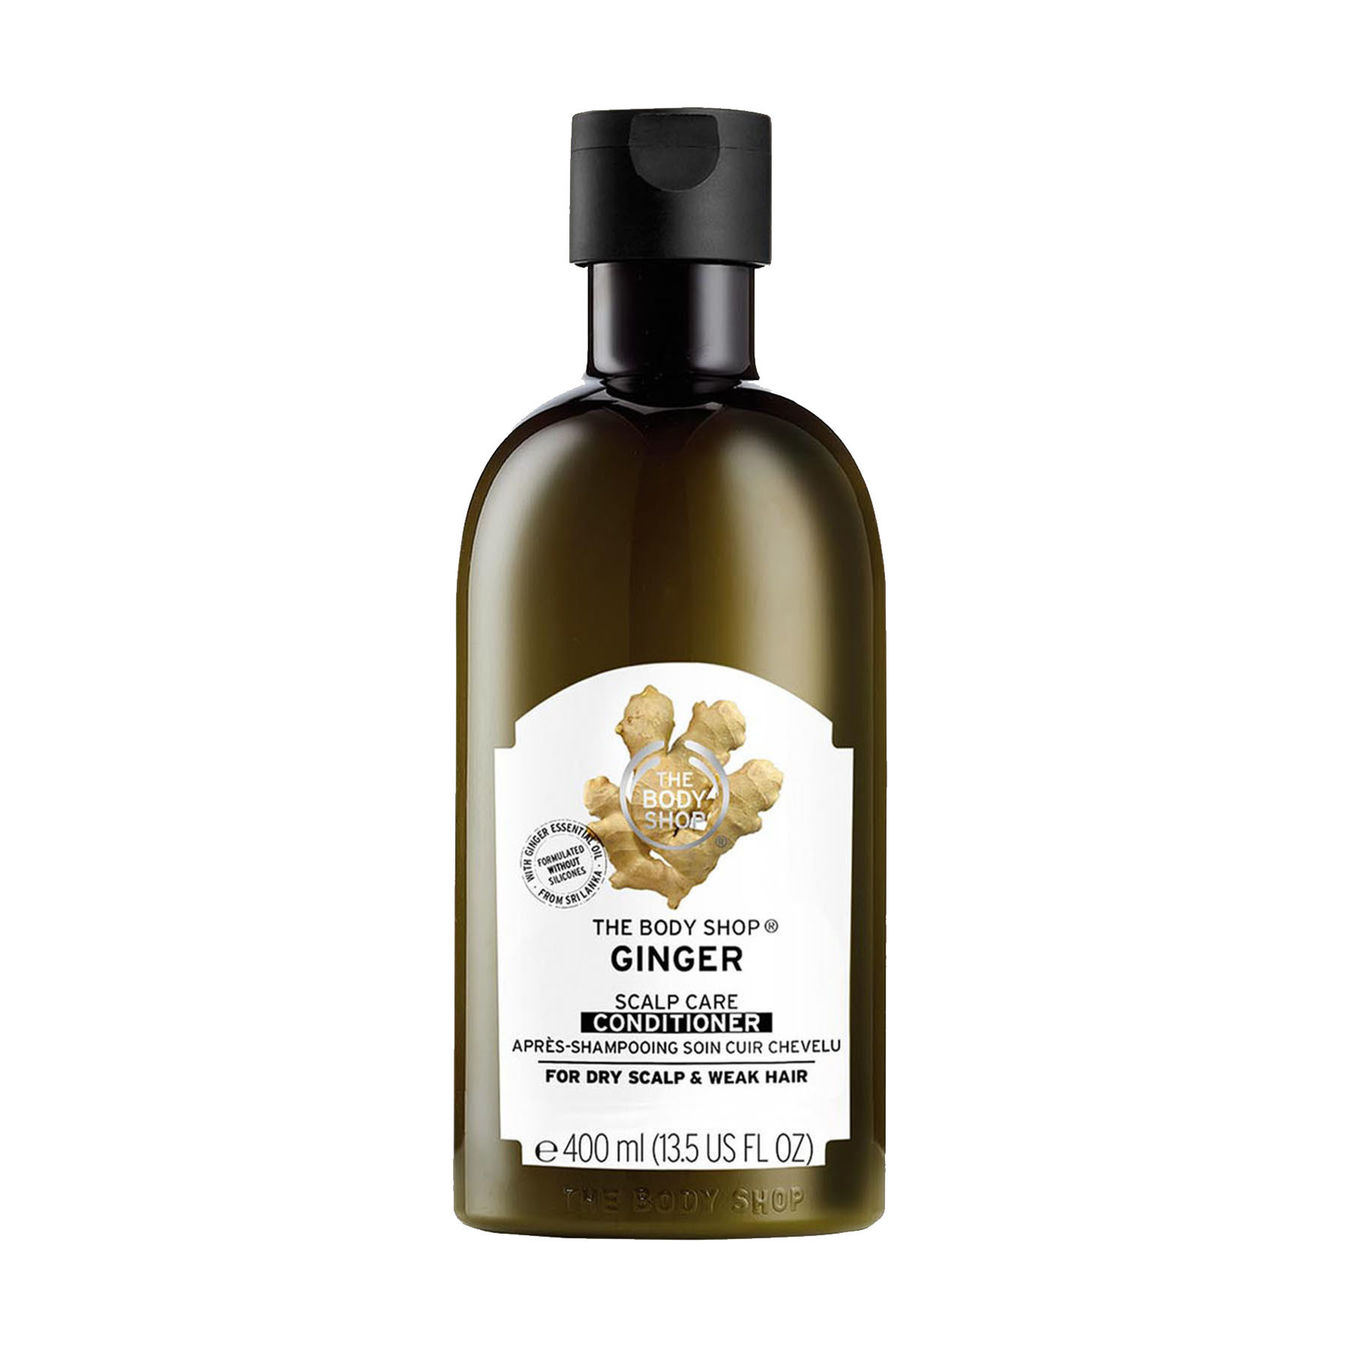 The Body Shop Ginger Scalp Care Conditioner von The Body Shop